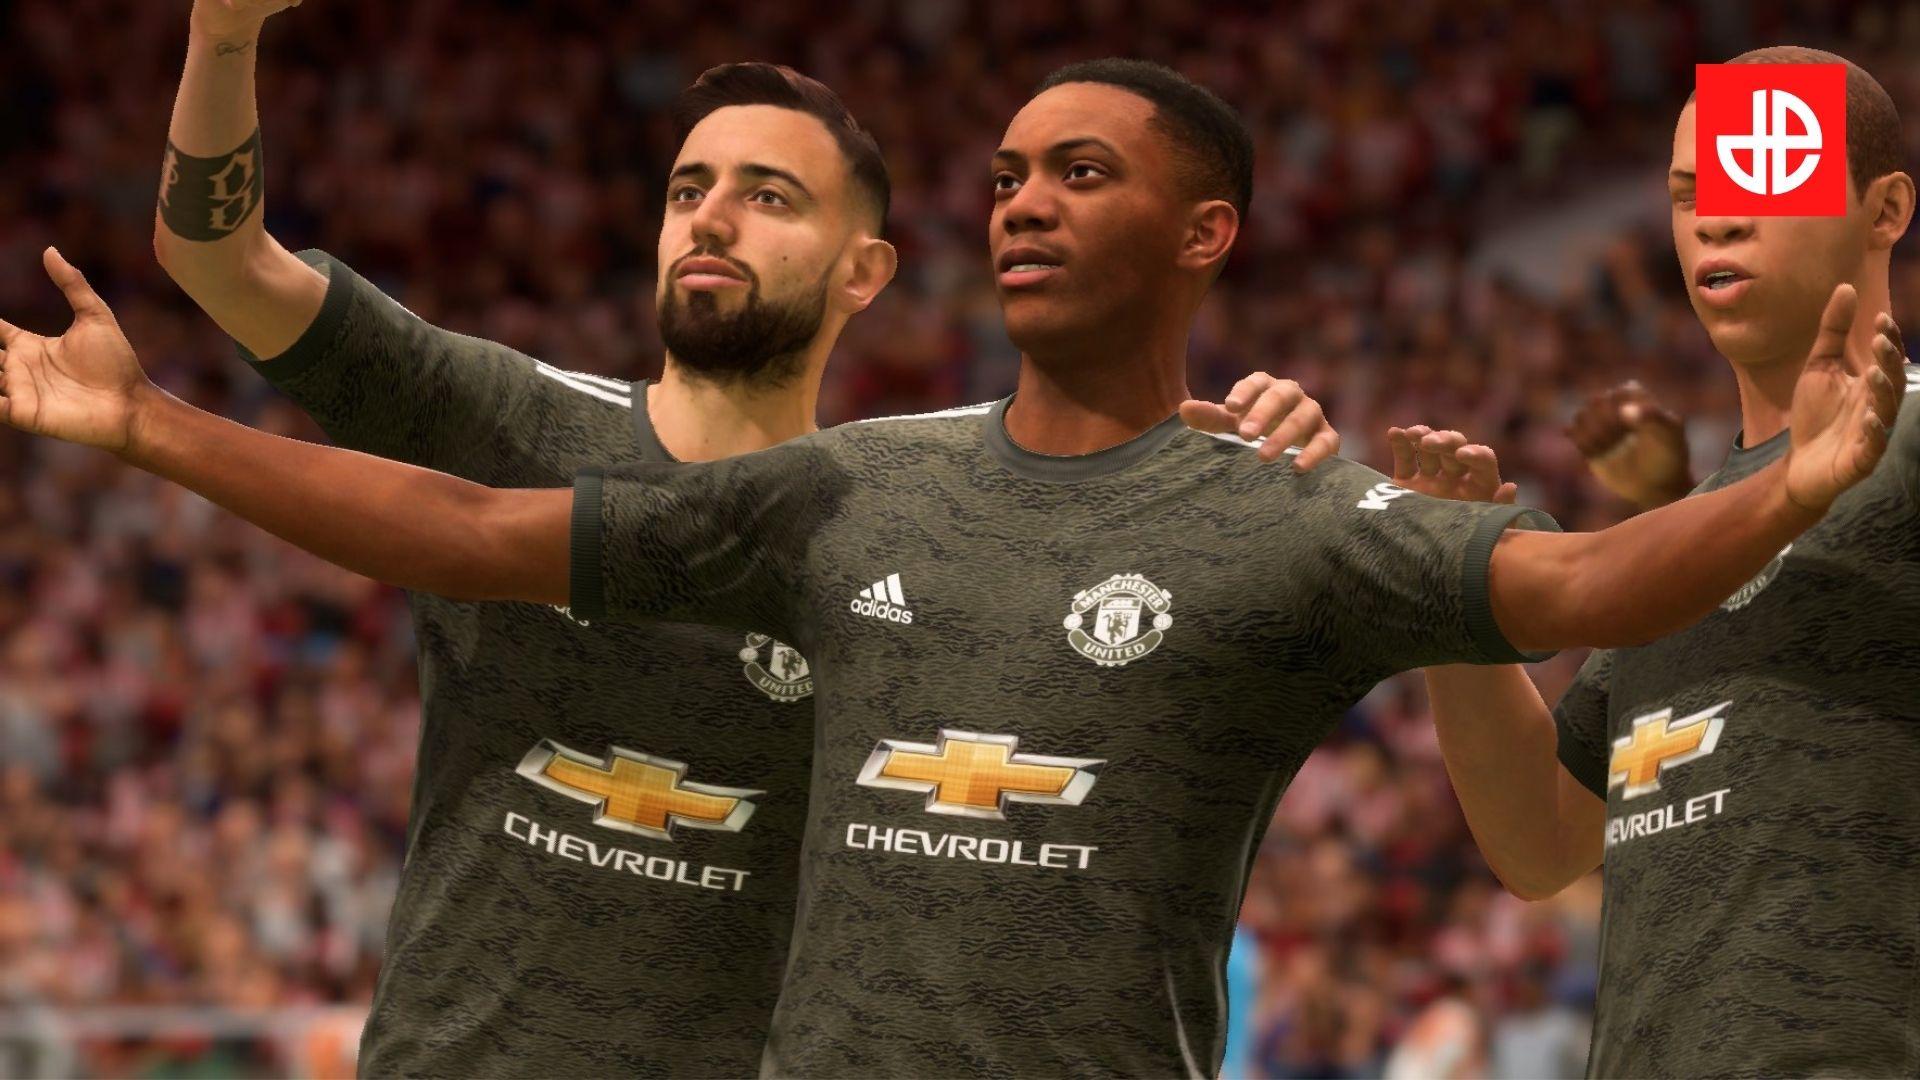 Best strikers FIFA 21: Career Mode signings for every budget